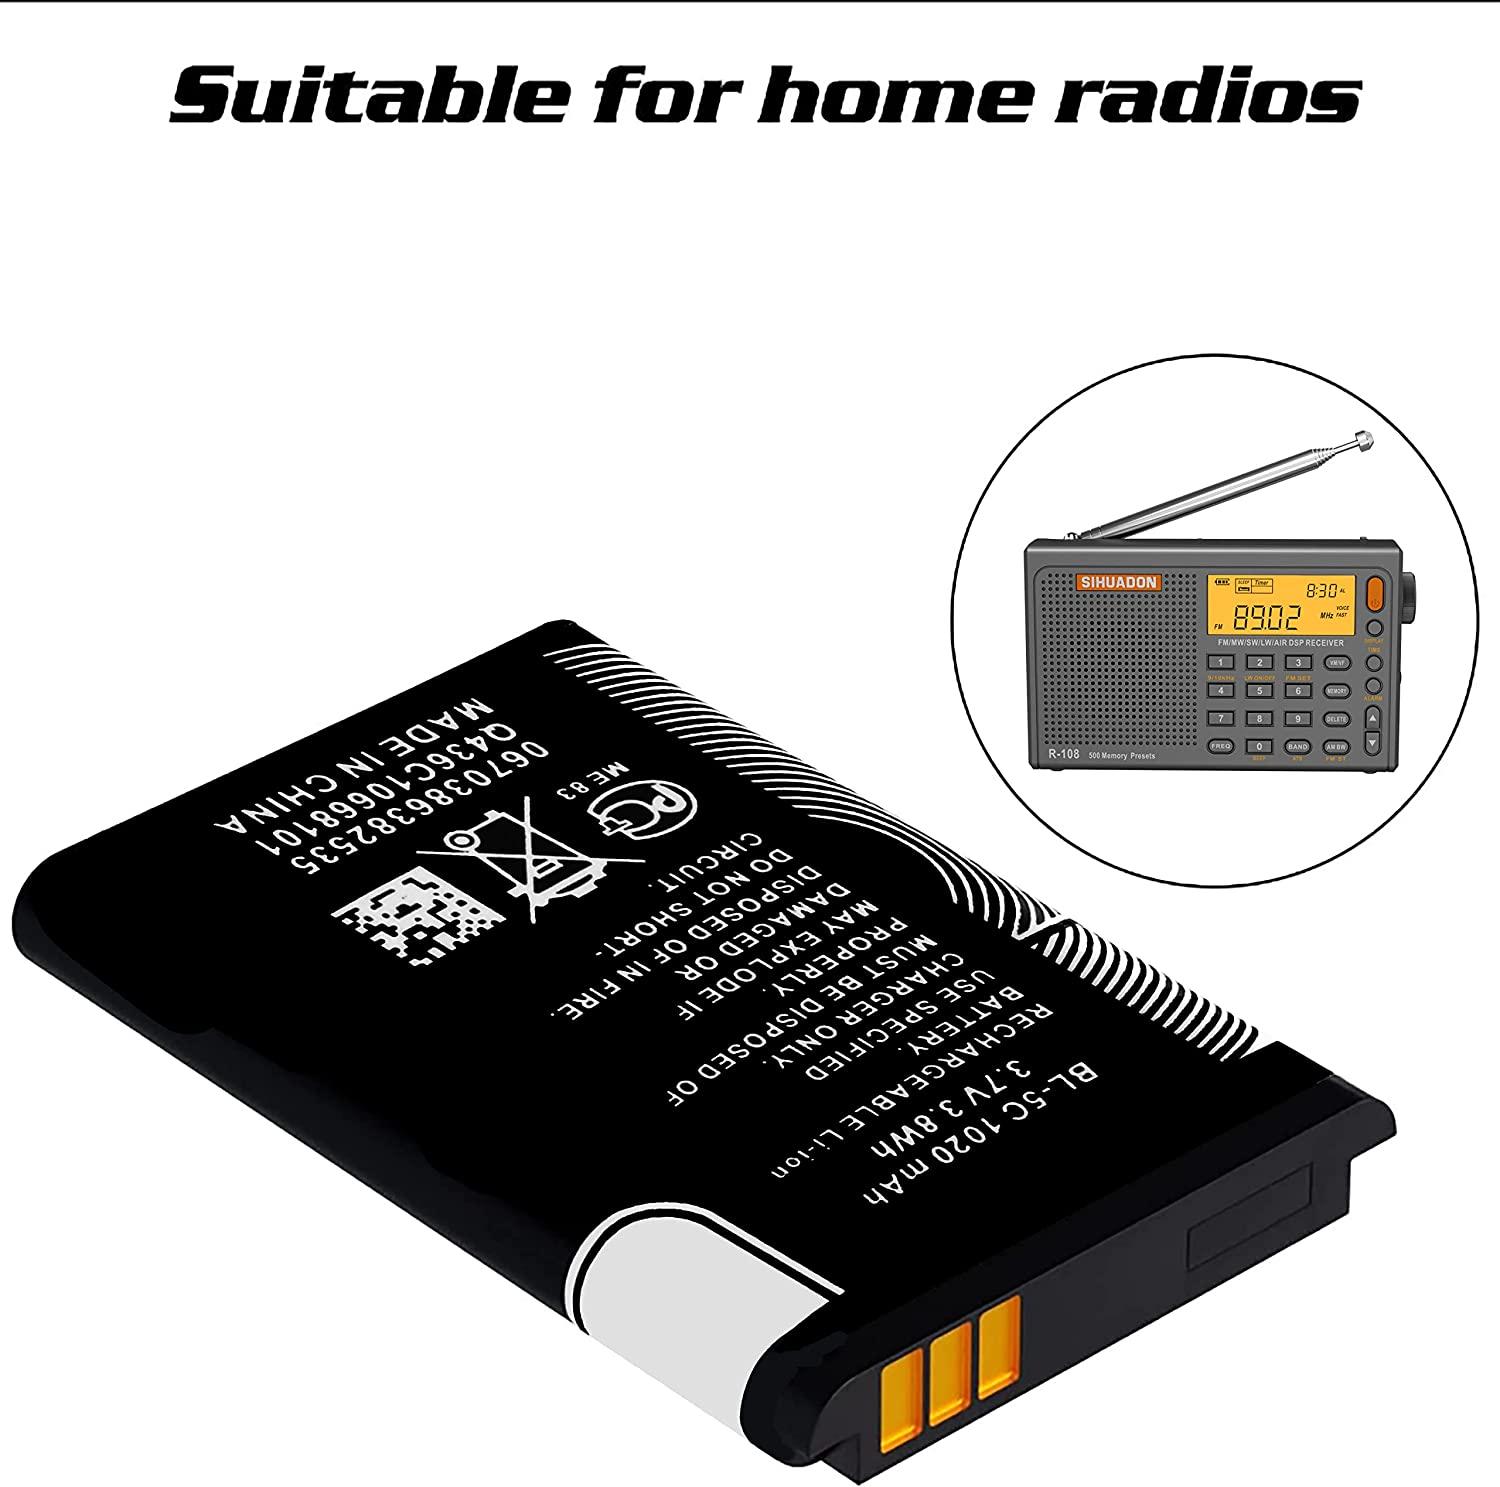 BL-5C 3.7V 1020mAh Rechargeable Battery Suitable for Household Radio with  Current Protection 2 Pieces (Black)